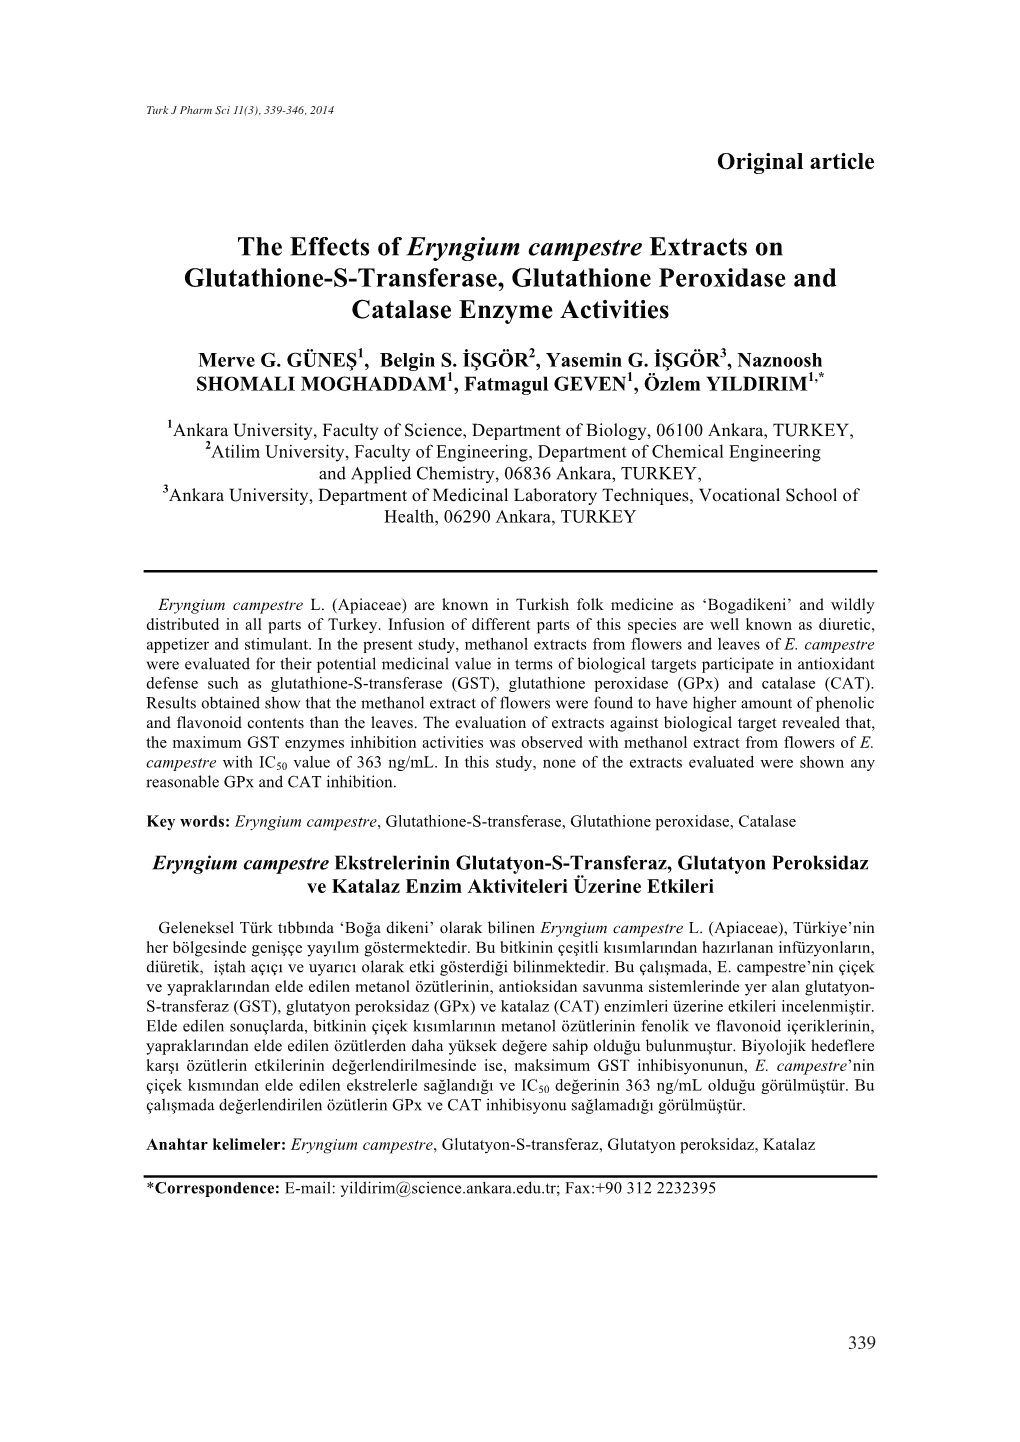 The Effects of Eryngium Campestre Extracts on Glutathione-S-Transferase, Glutathione Peroxidase and Catalase Enzyme Activities